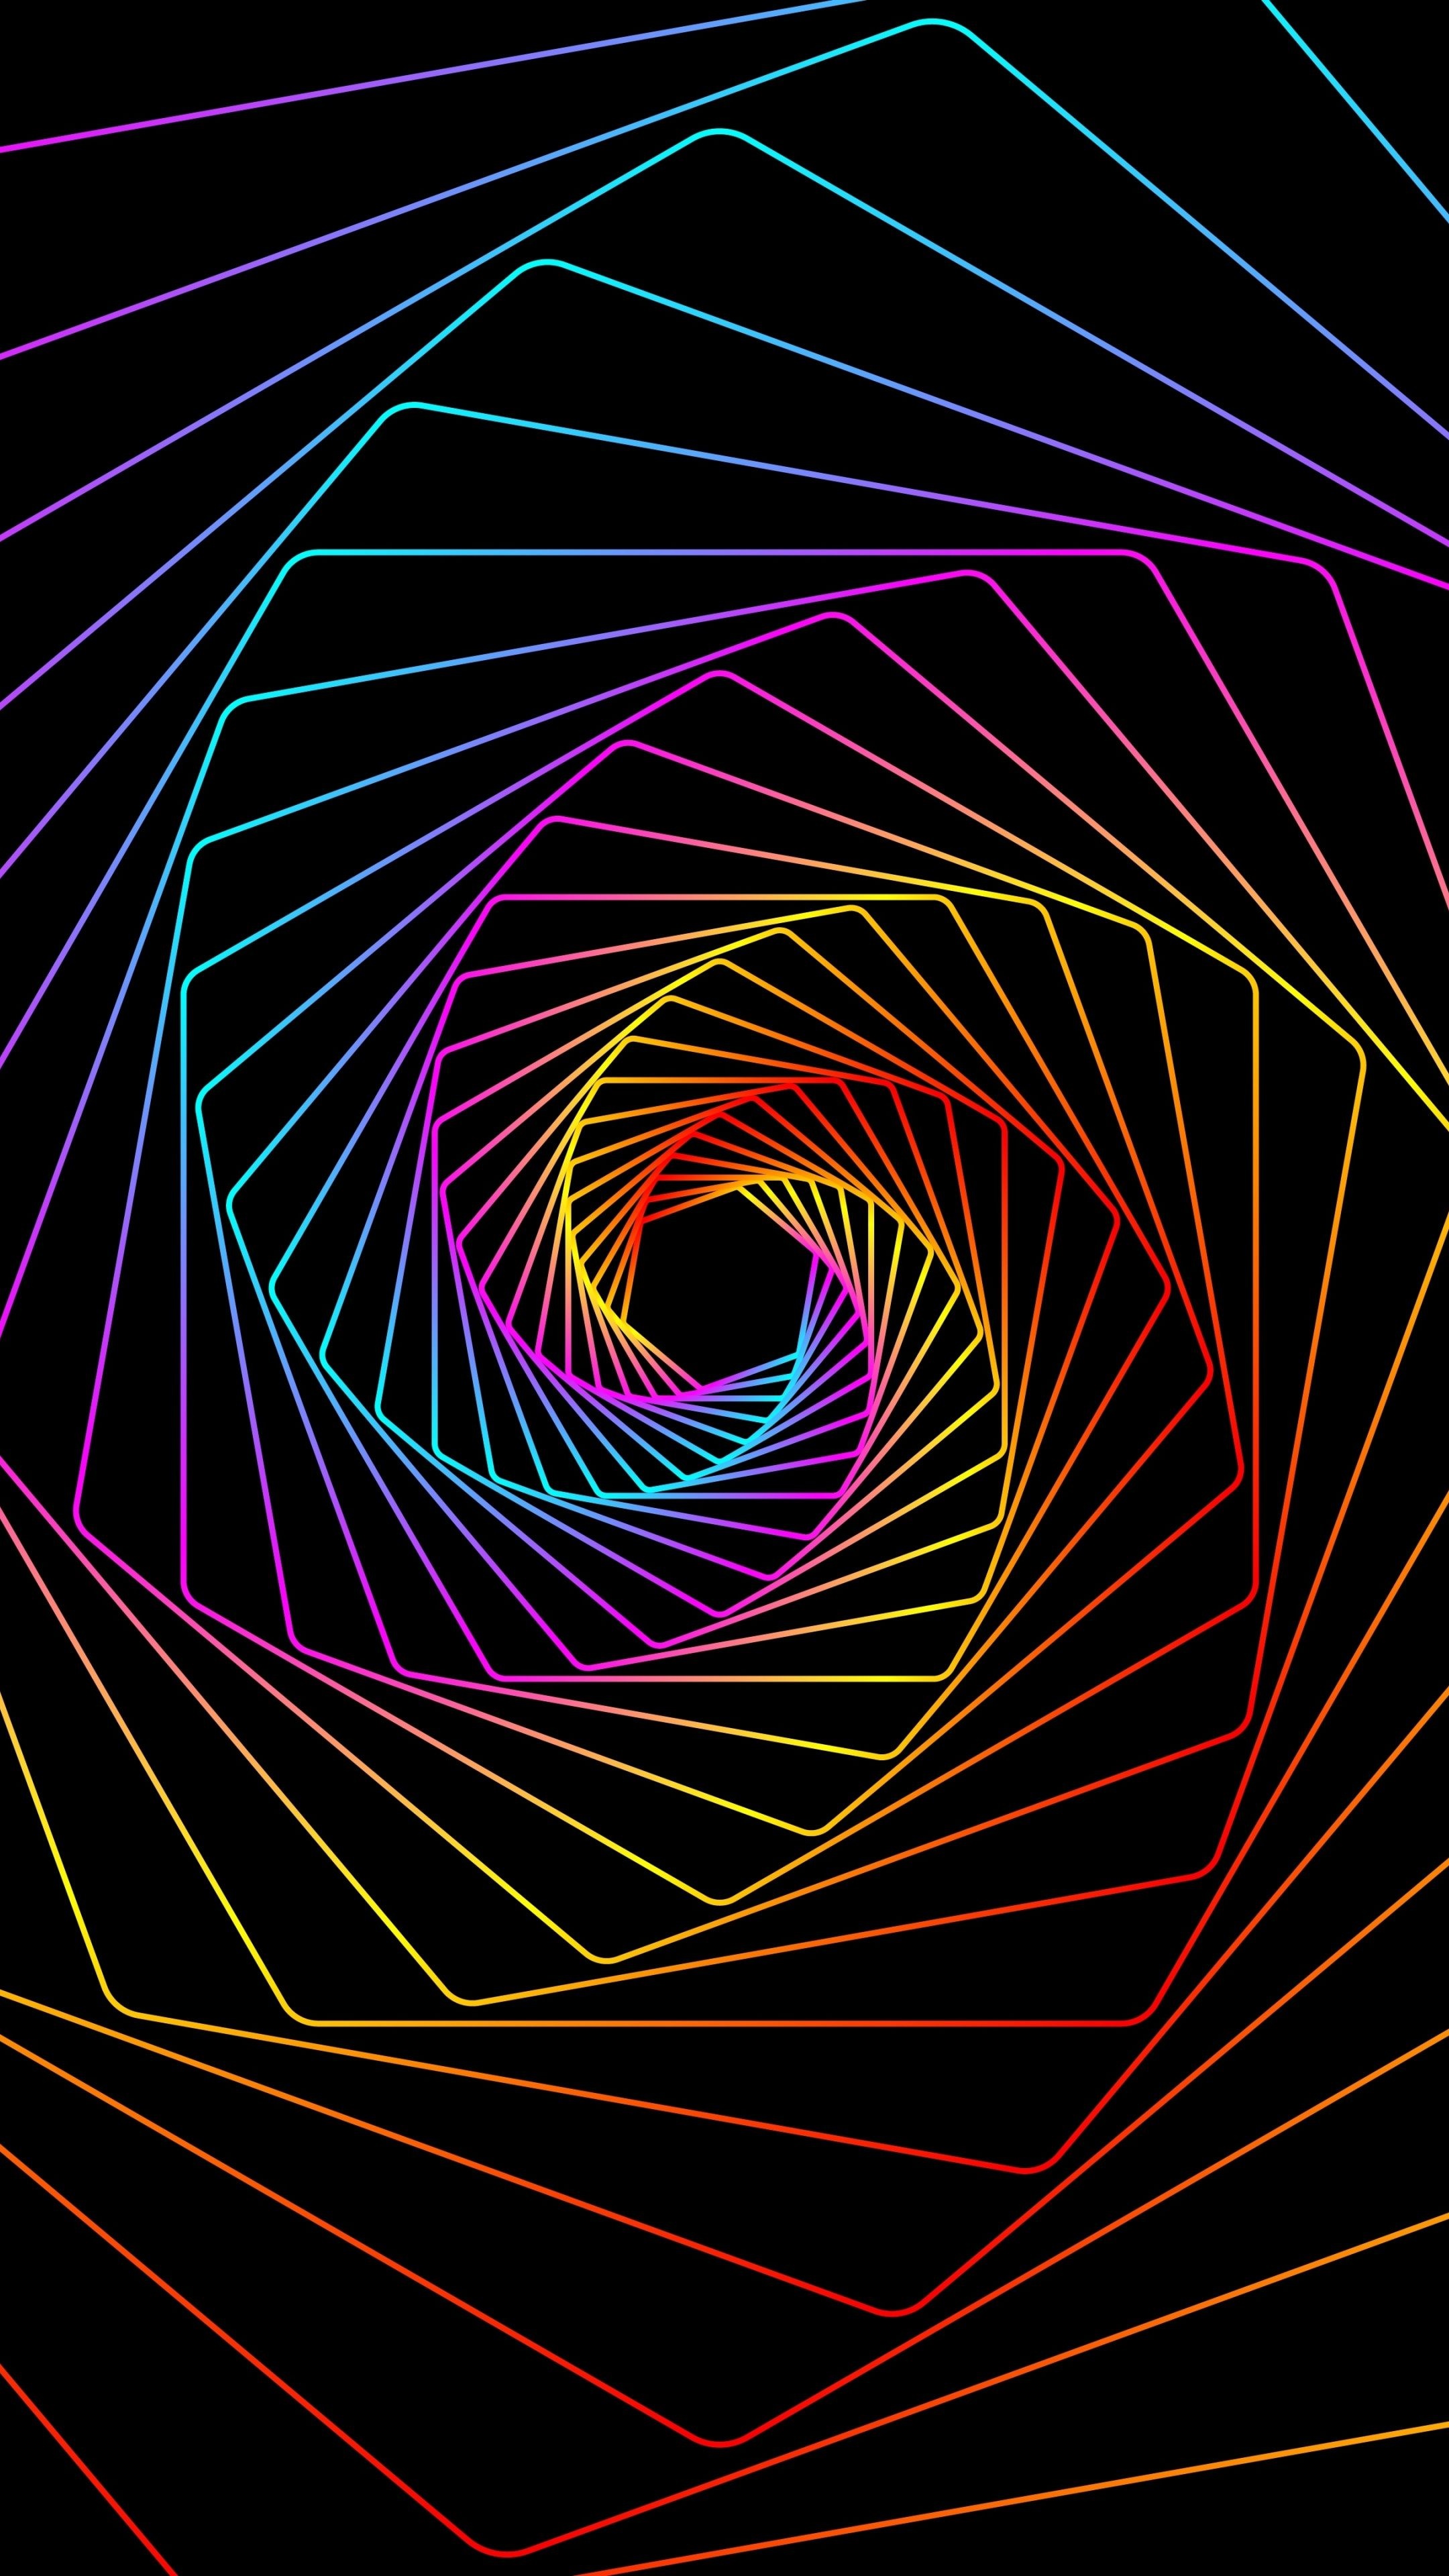 Golden Ratio: Multicolored lines, Swirl, Abstract, Hexagons, Obtuse angles, Geometric. 2160x3840 4K Wallpaper.